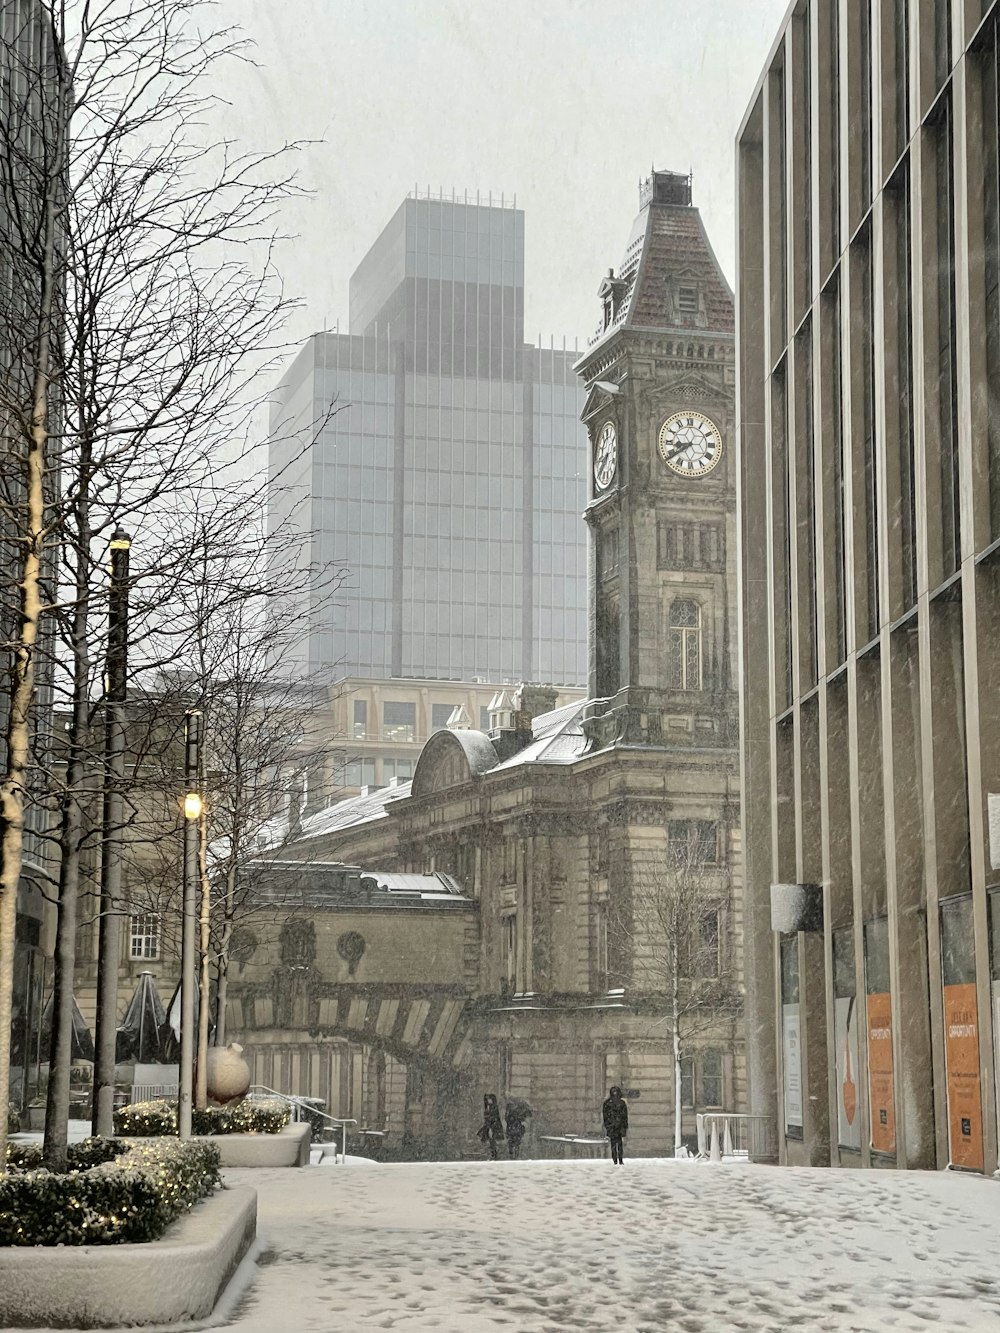 a clock tower in the middle of a snowy city